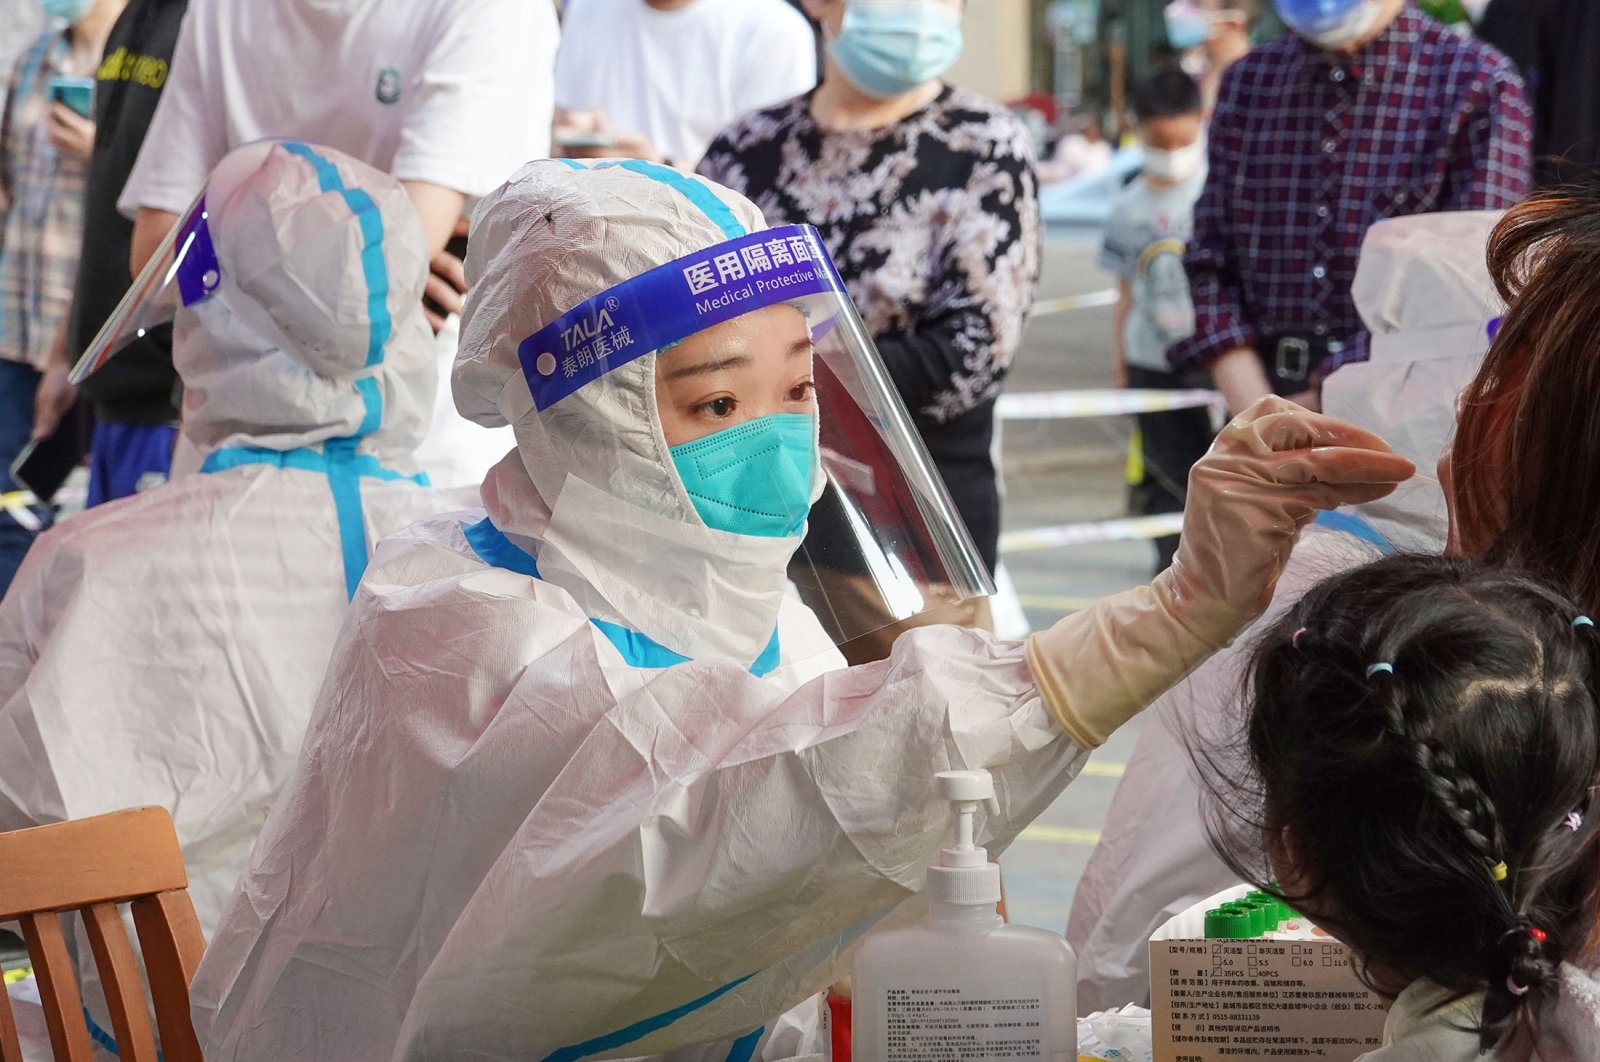 A medical worker wearing medical protective clothing and a face mask takes a sample from a patient for COVID-19 tests, in Changzhou, China, May 21, 2022. (Getty Images Photo)